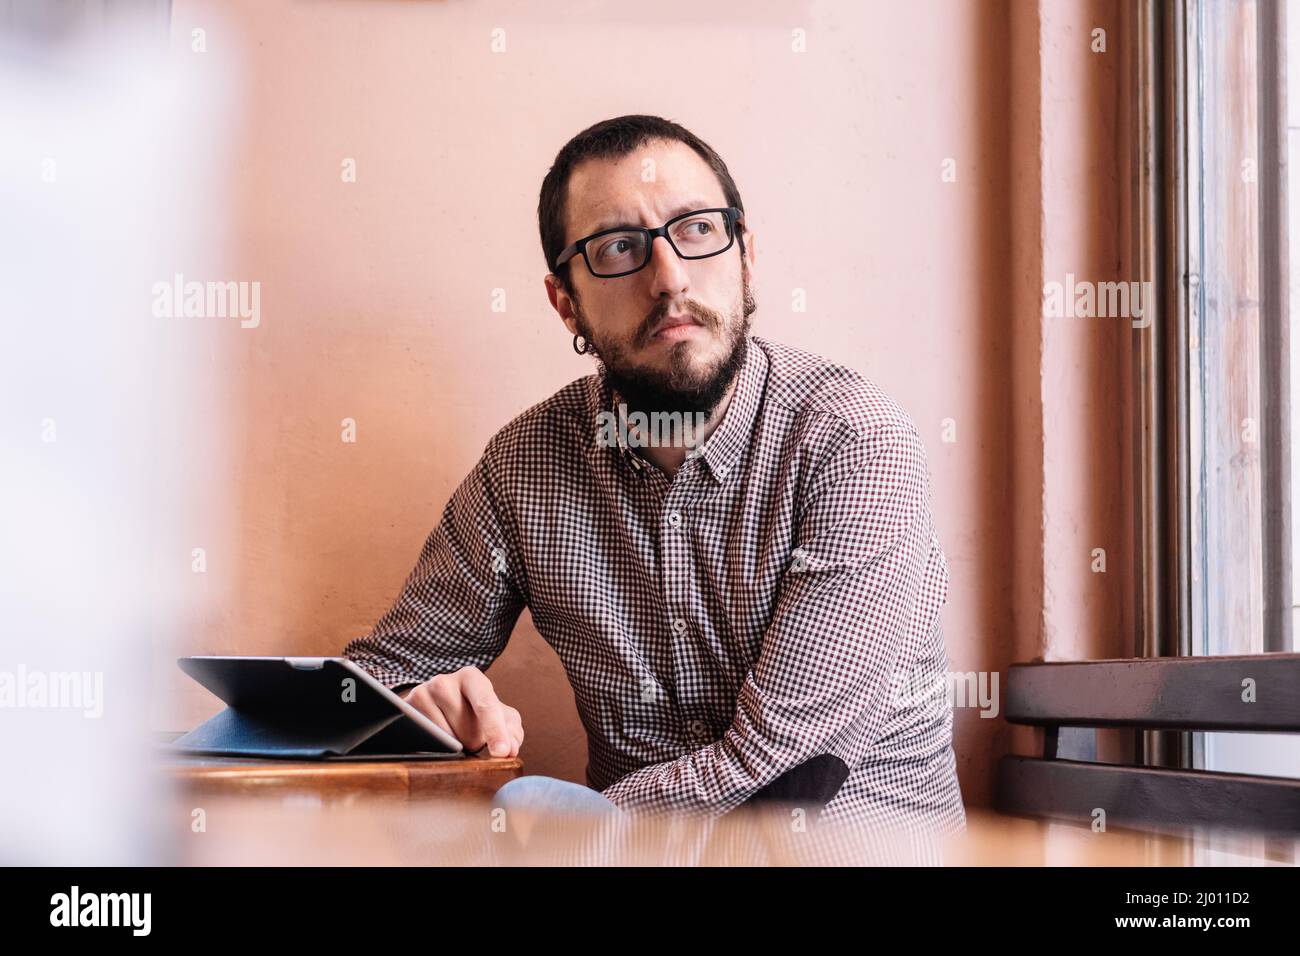 young businessman working on his tablet in a cafe shop Stock Photo